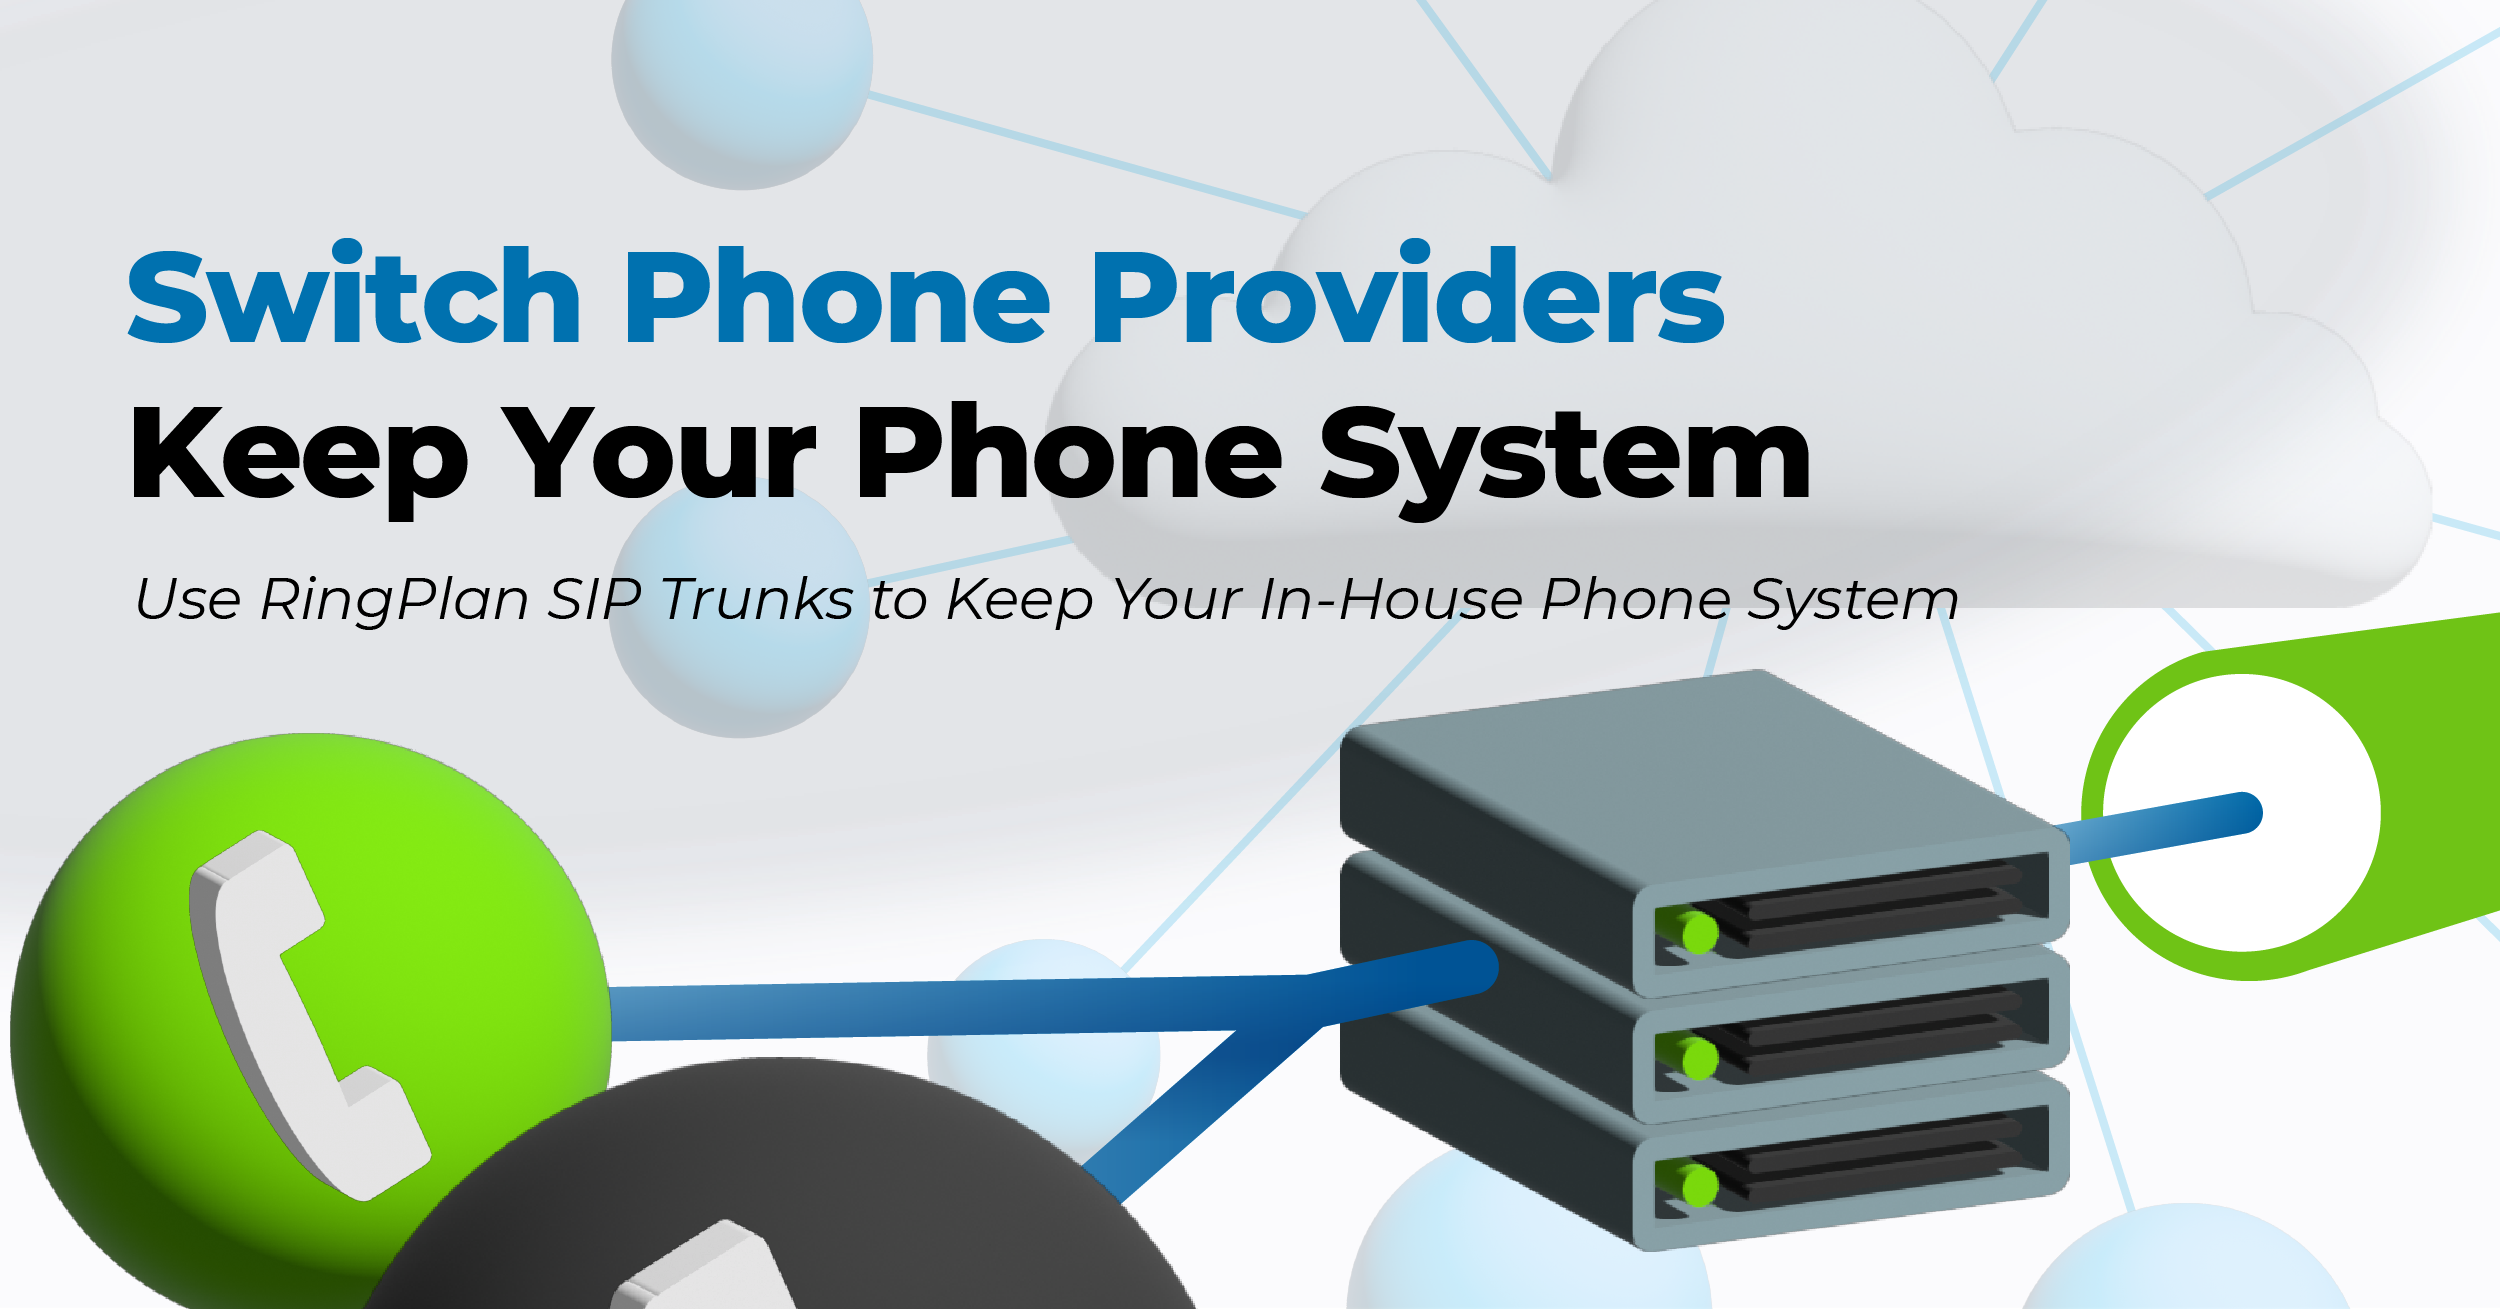 Switch Phone Providers, Keep Your In-House Phone System—RingPlan SIP Trunks